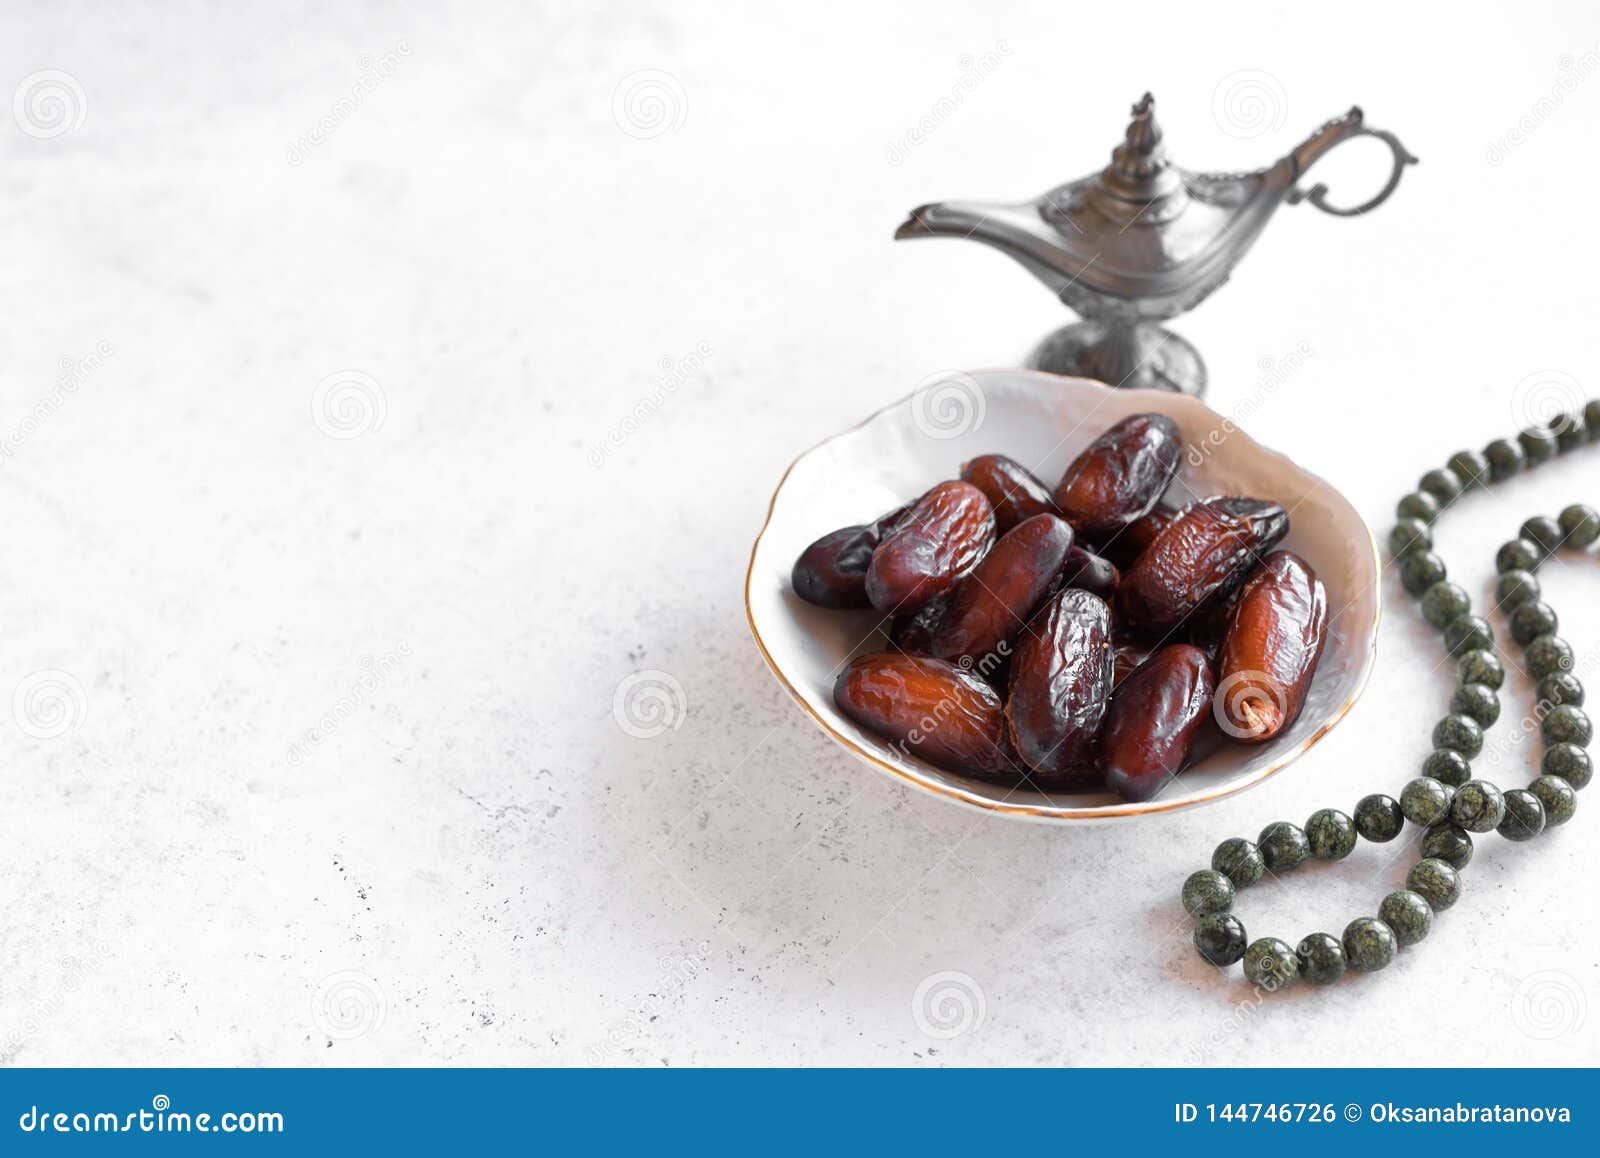 dates for iftar meal